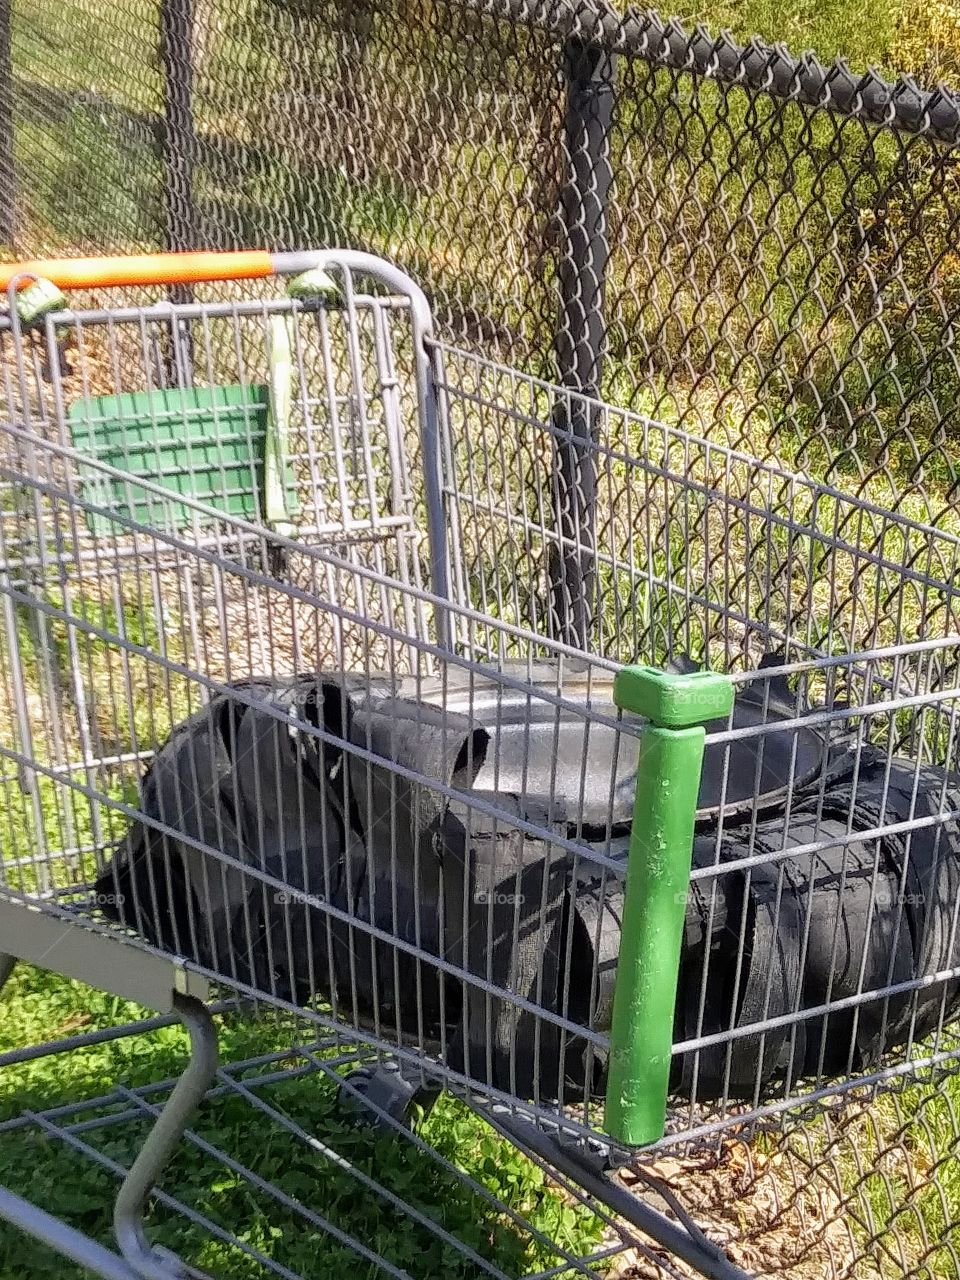 shopping cart with an old tire in the basket